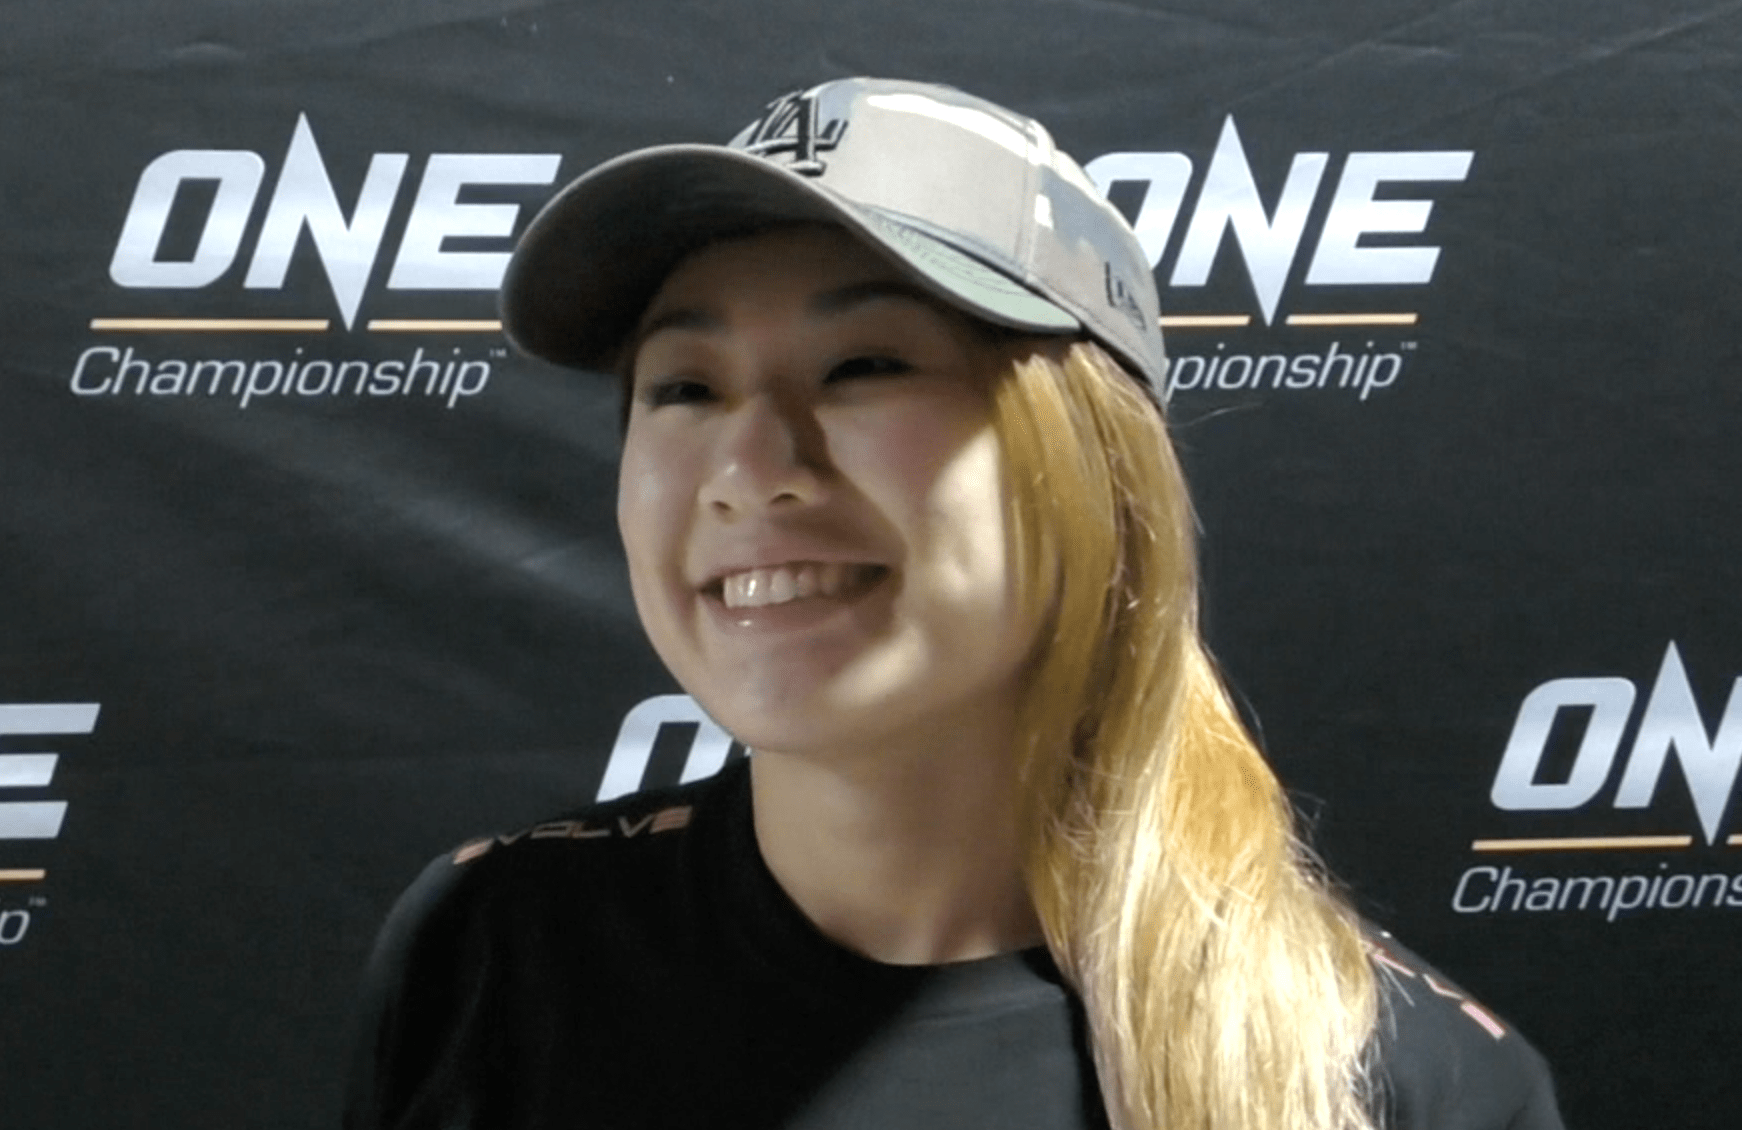 EXCLUSIVE: Interview With Angela Lee